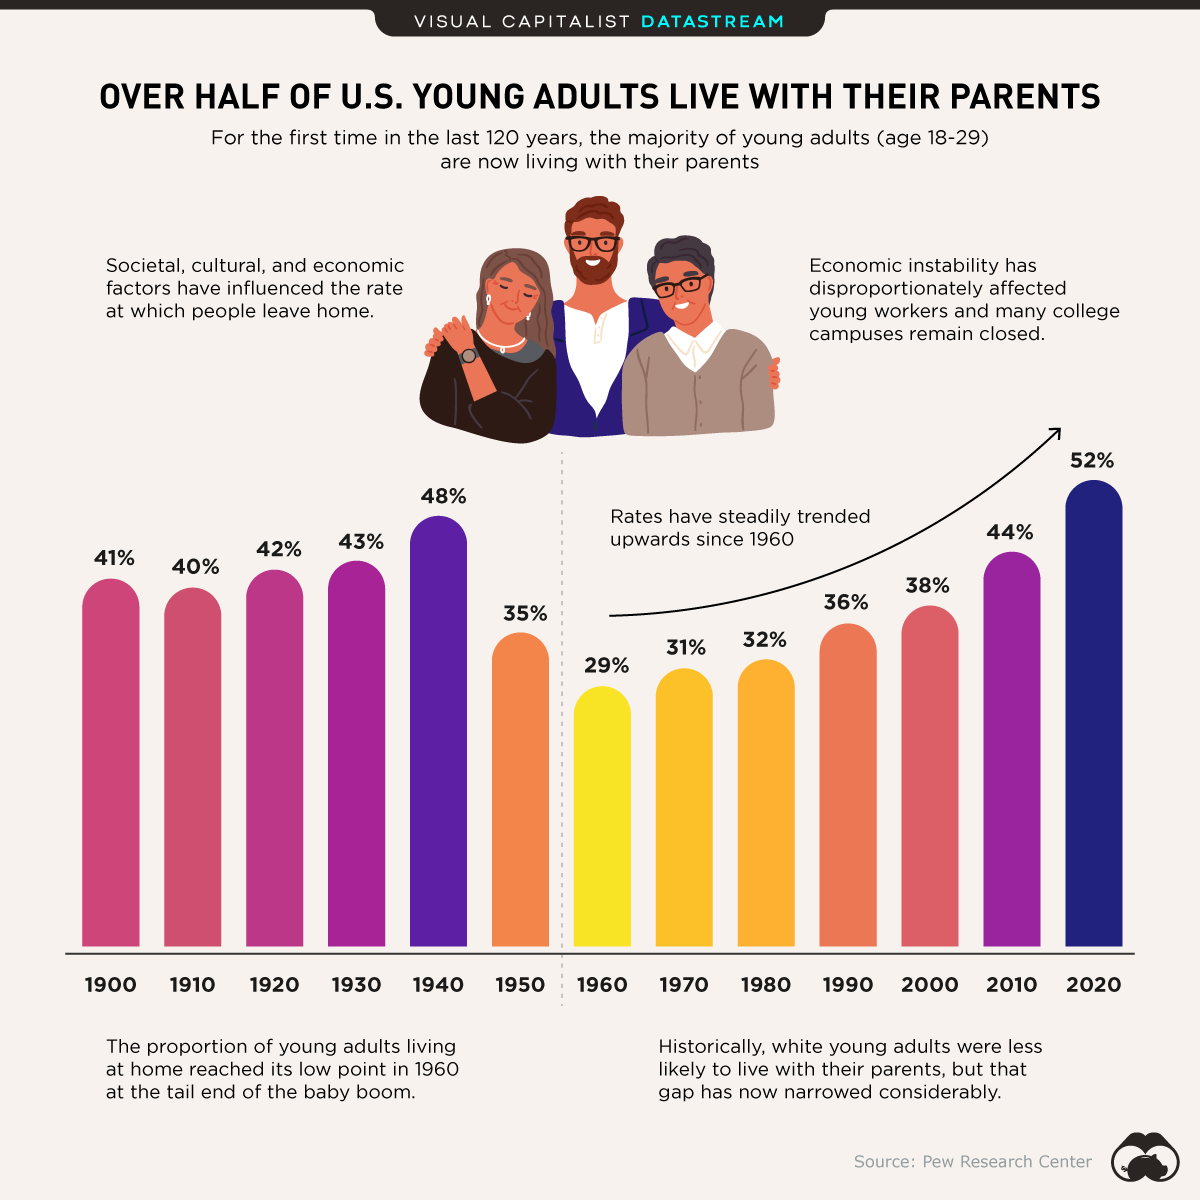 Over Half of U.S. Young Adults Now Live With Their Parents